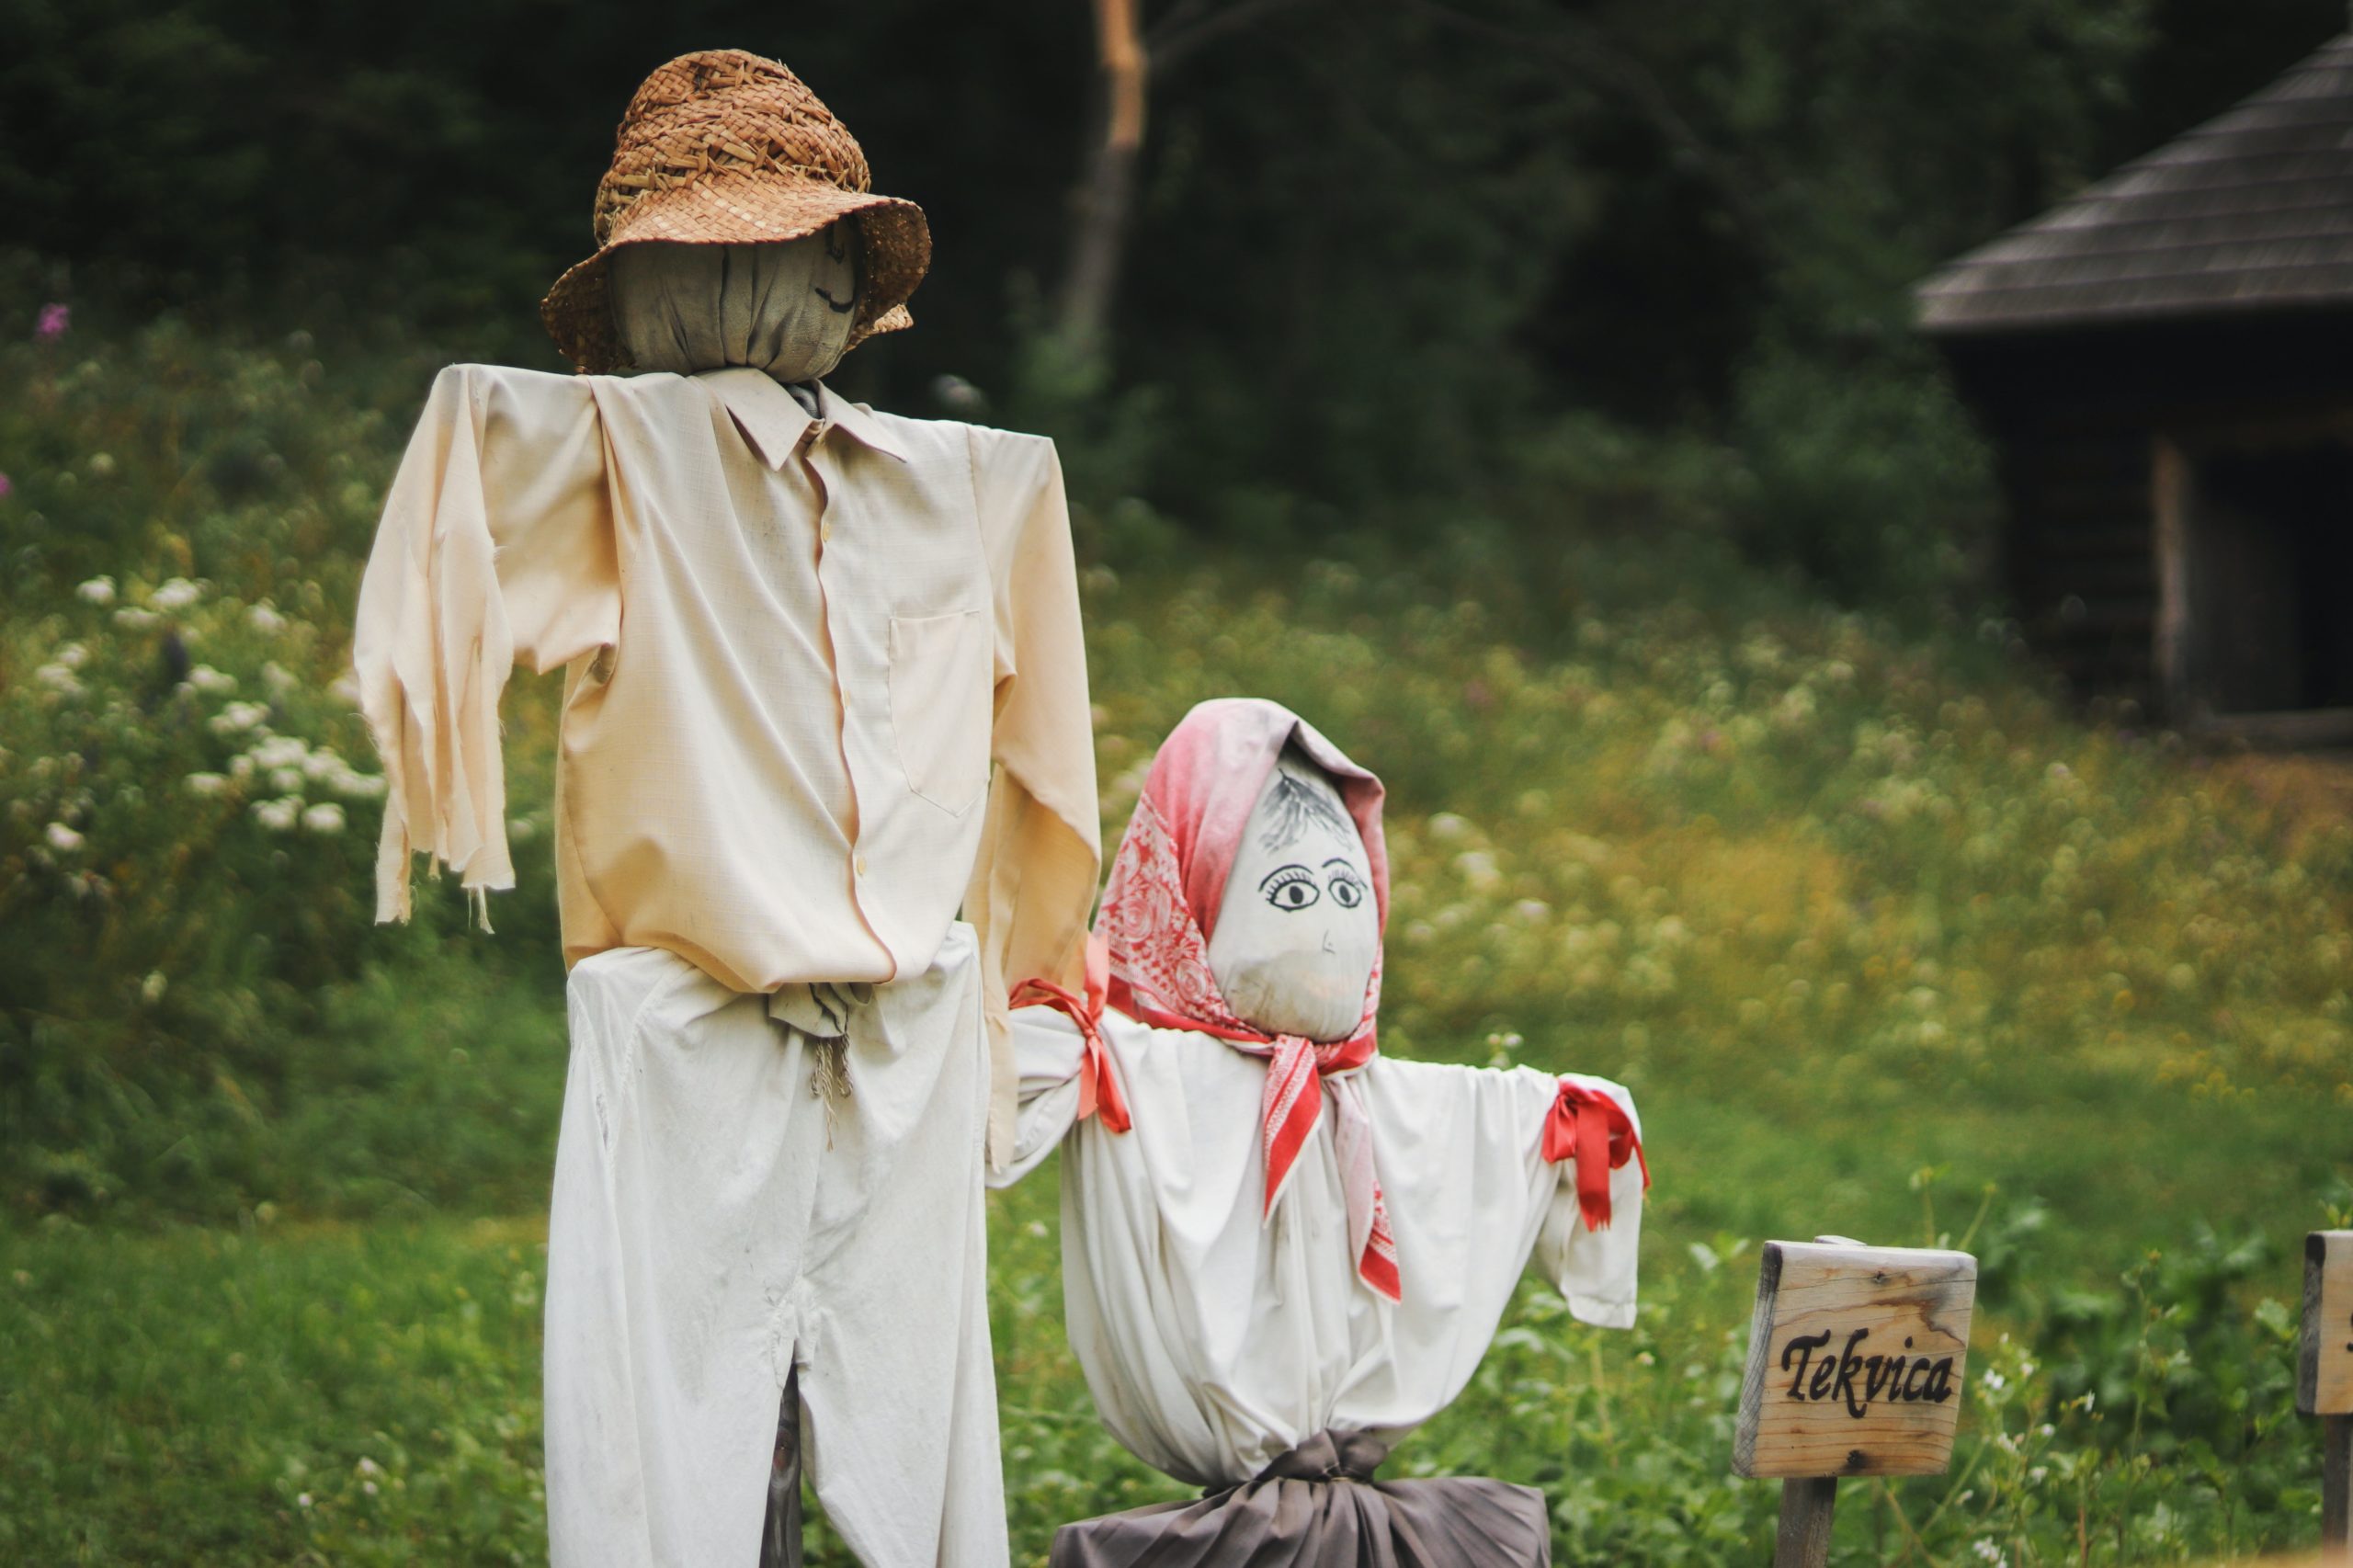 Two scarecrows wearing white shirts and hats. Scarecrow decorating fall fundraising idea